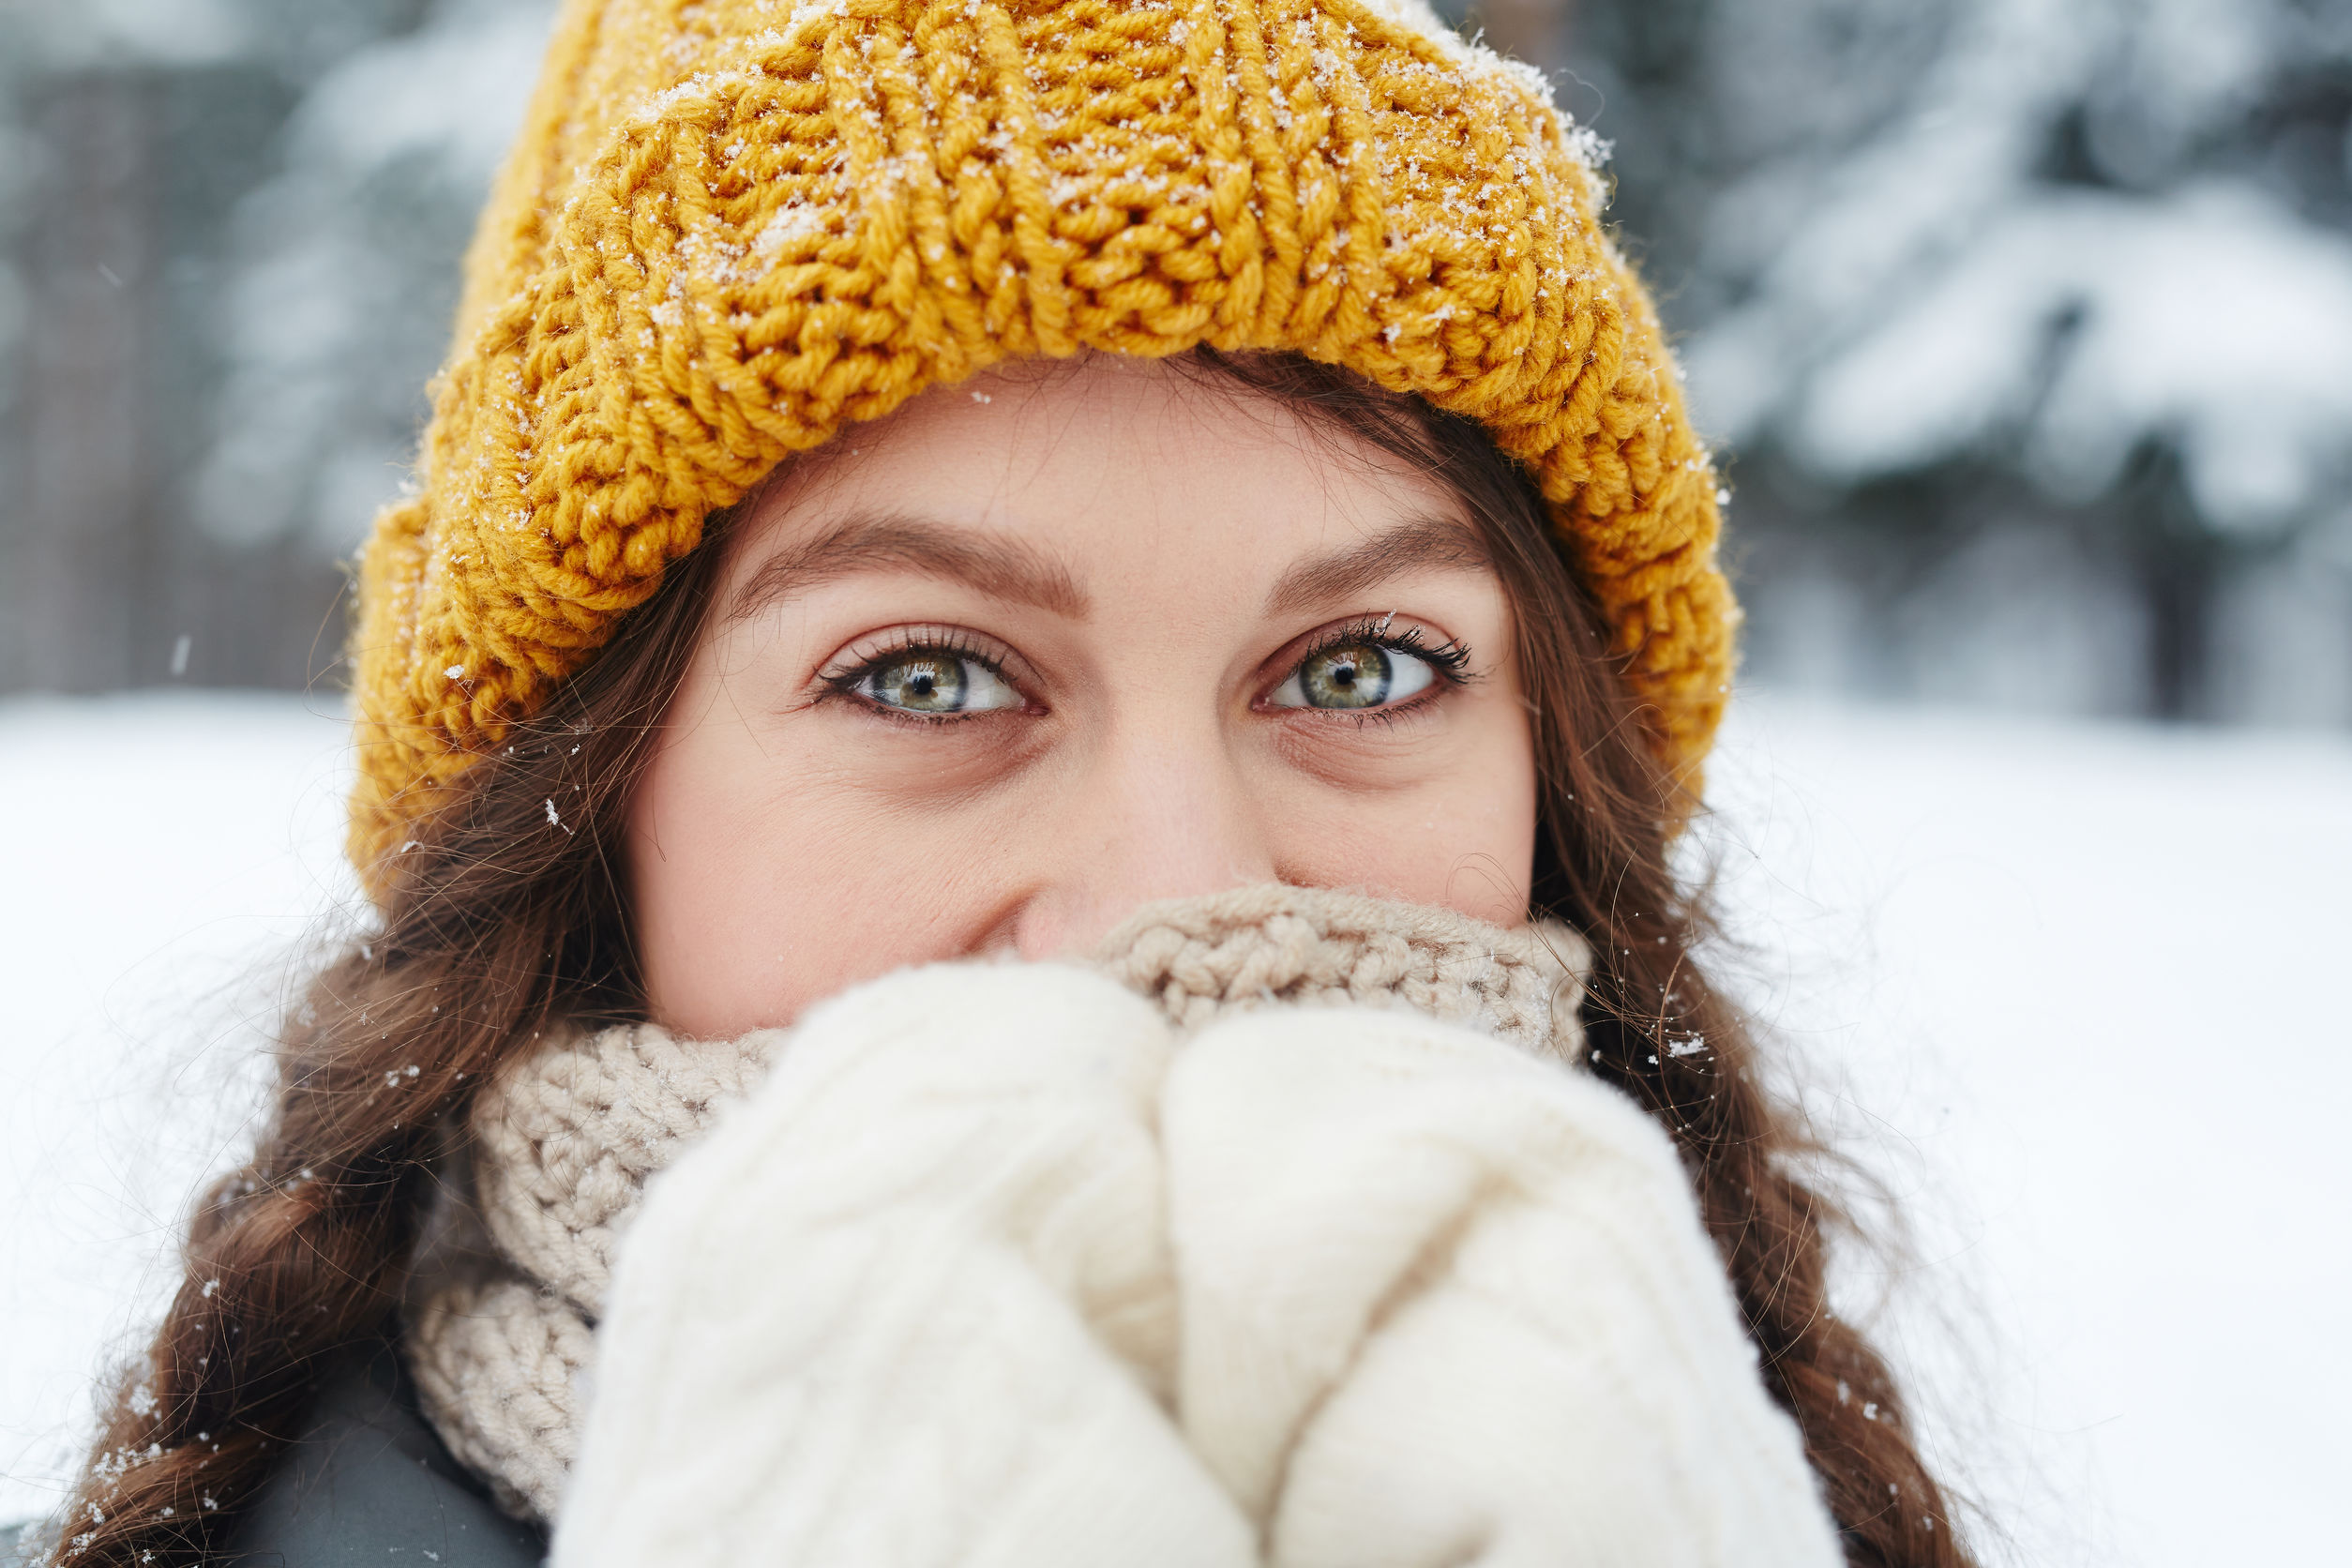 Featured image for “10 Dental Care Tips to Avoid Teeth Pain During Winter”